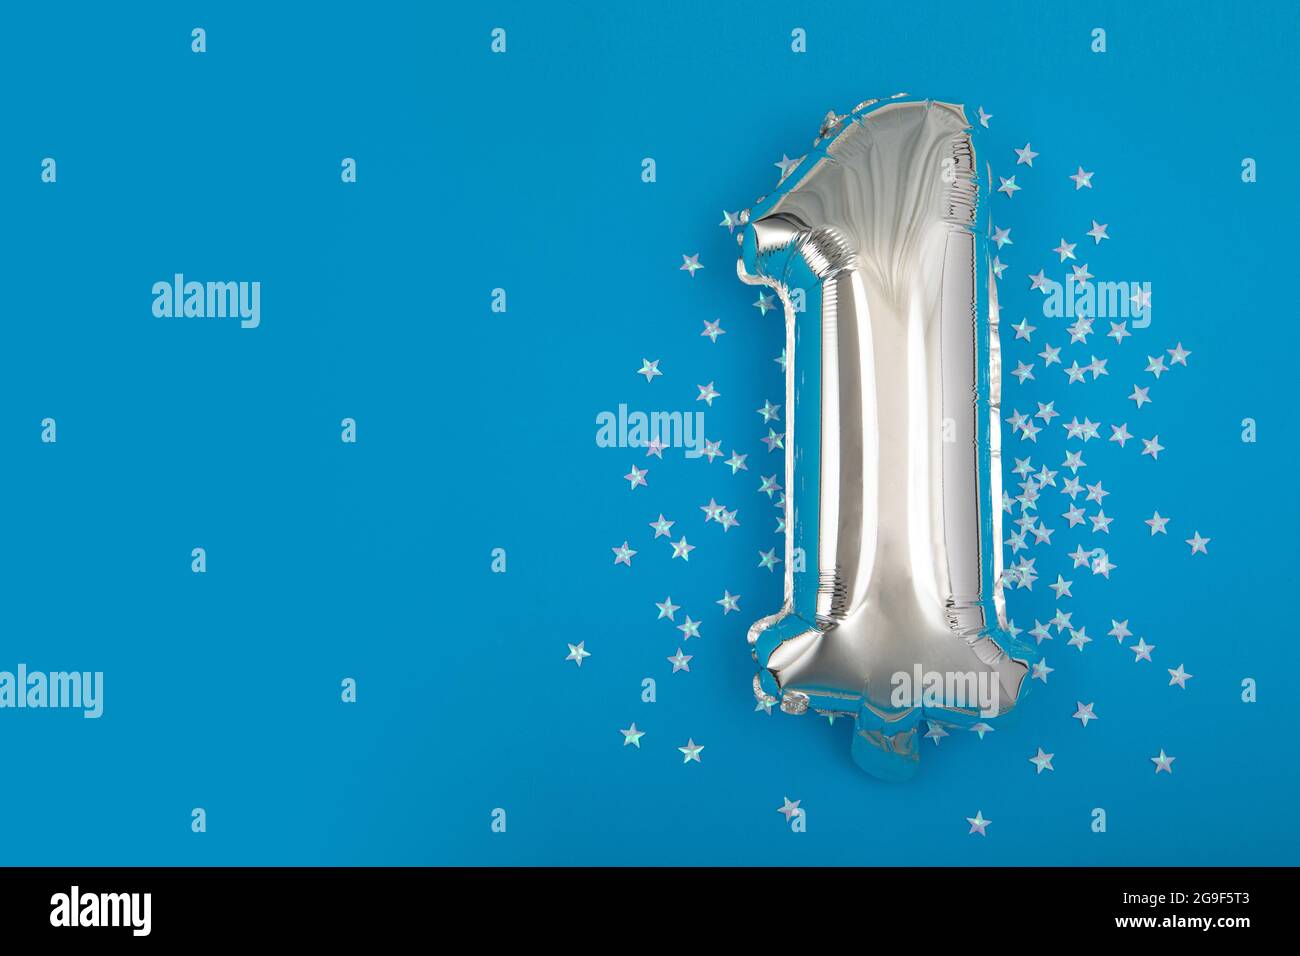 Silver balloon 1 on a blue background with confetti stars. Number One 1. Holiday Party Decoration or postcard concept with top view on blue background Stock Photo